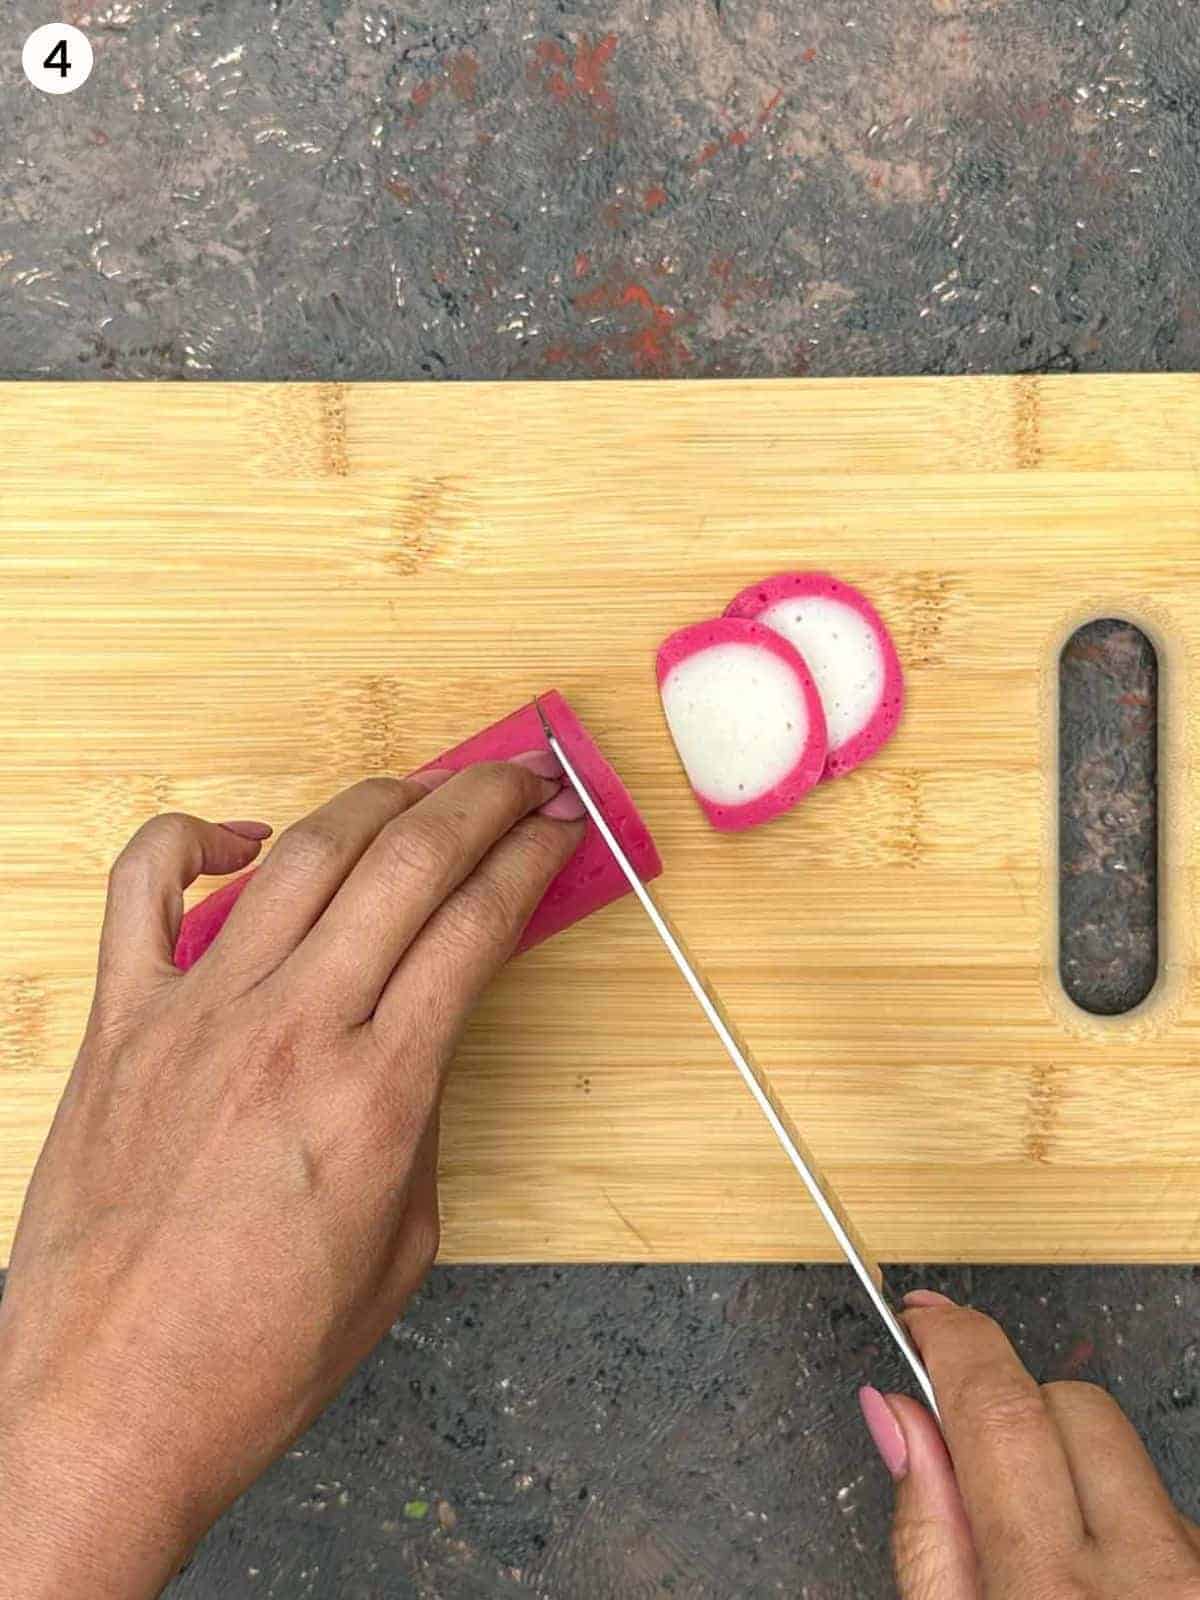 Slicing kamaboko with a knife on a wooden board